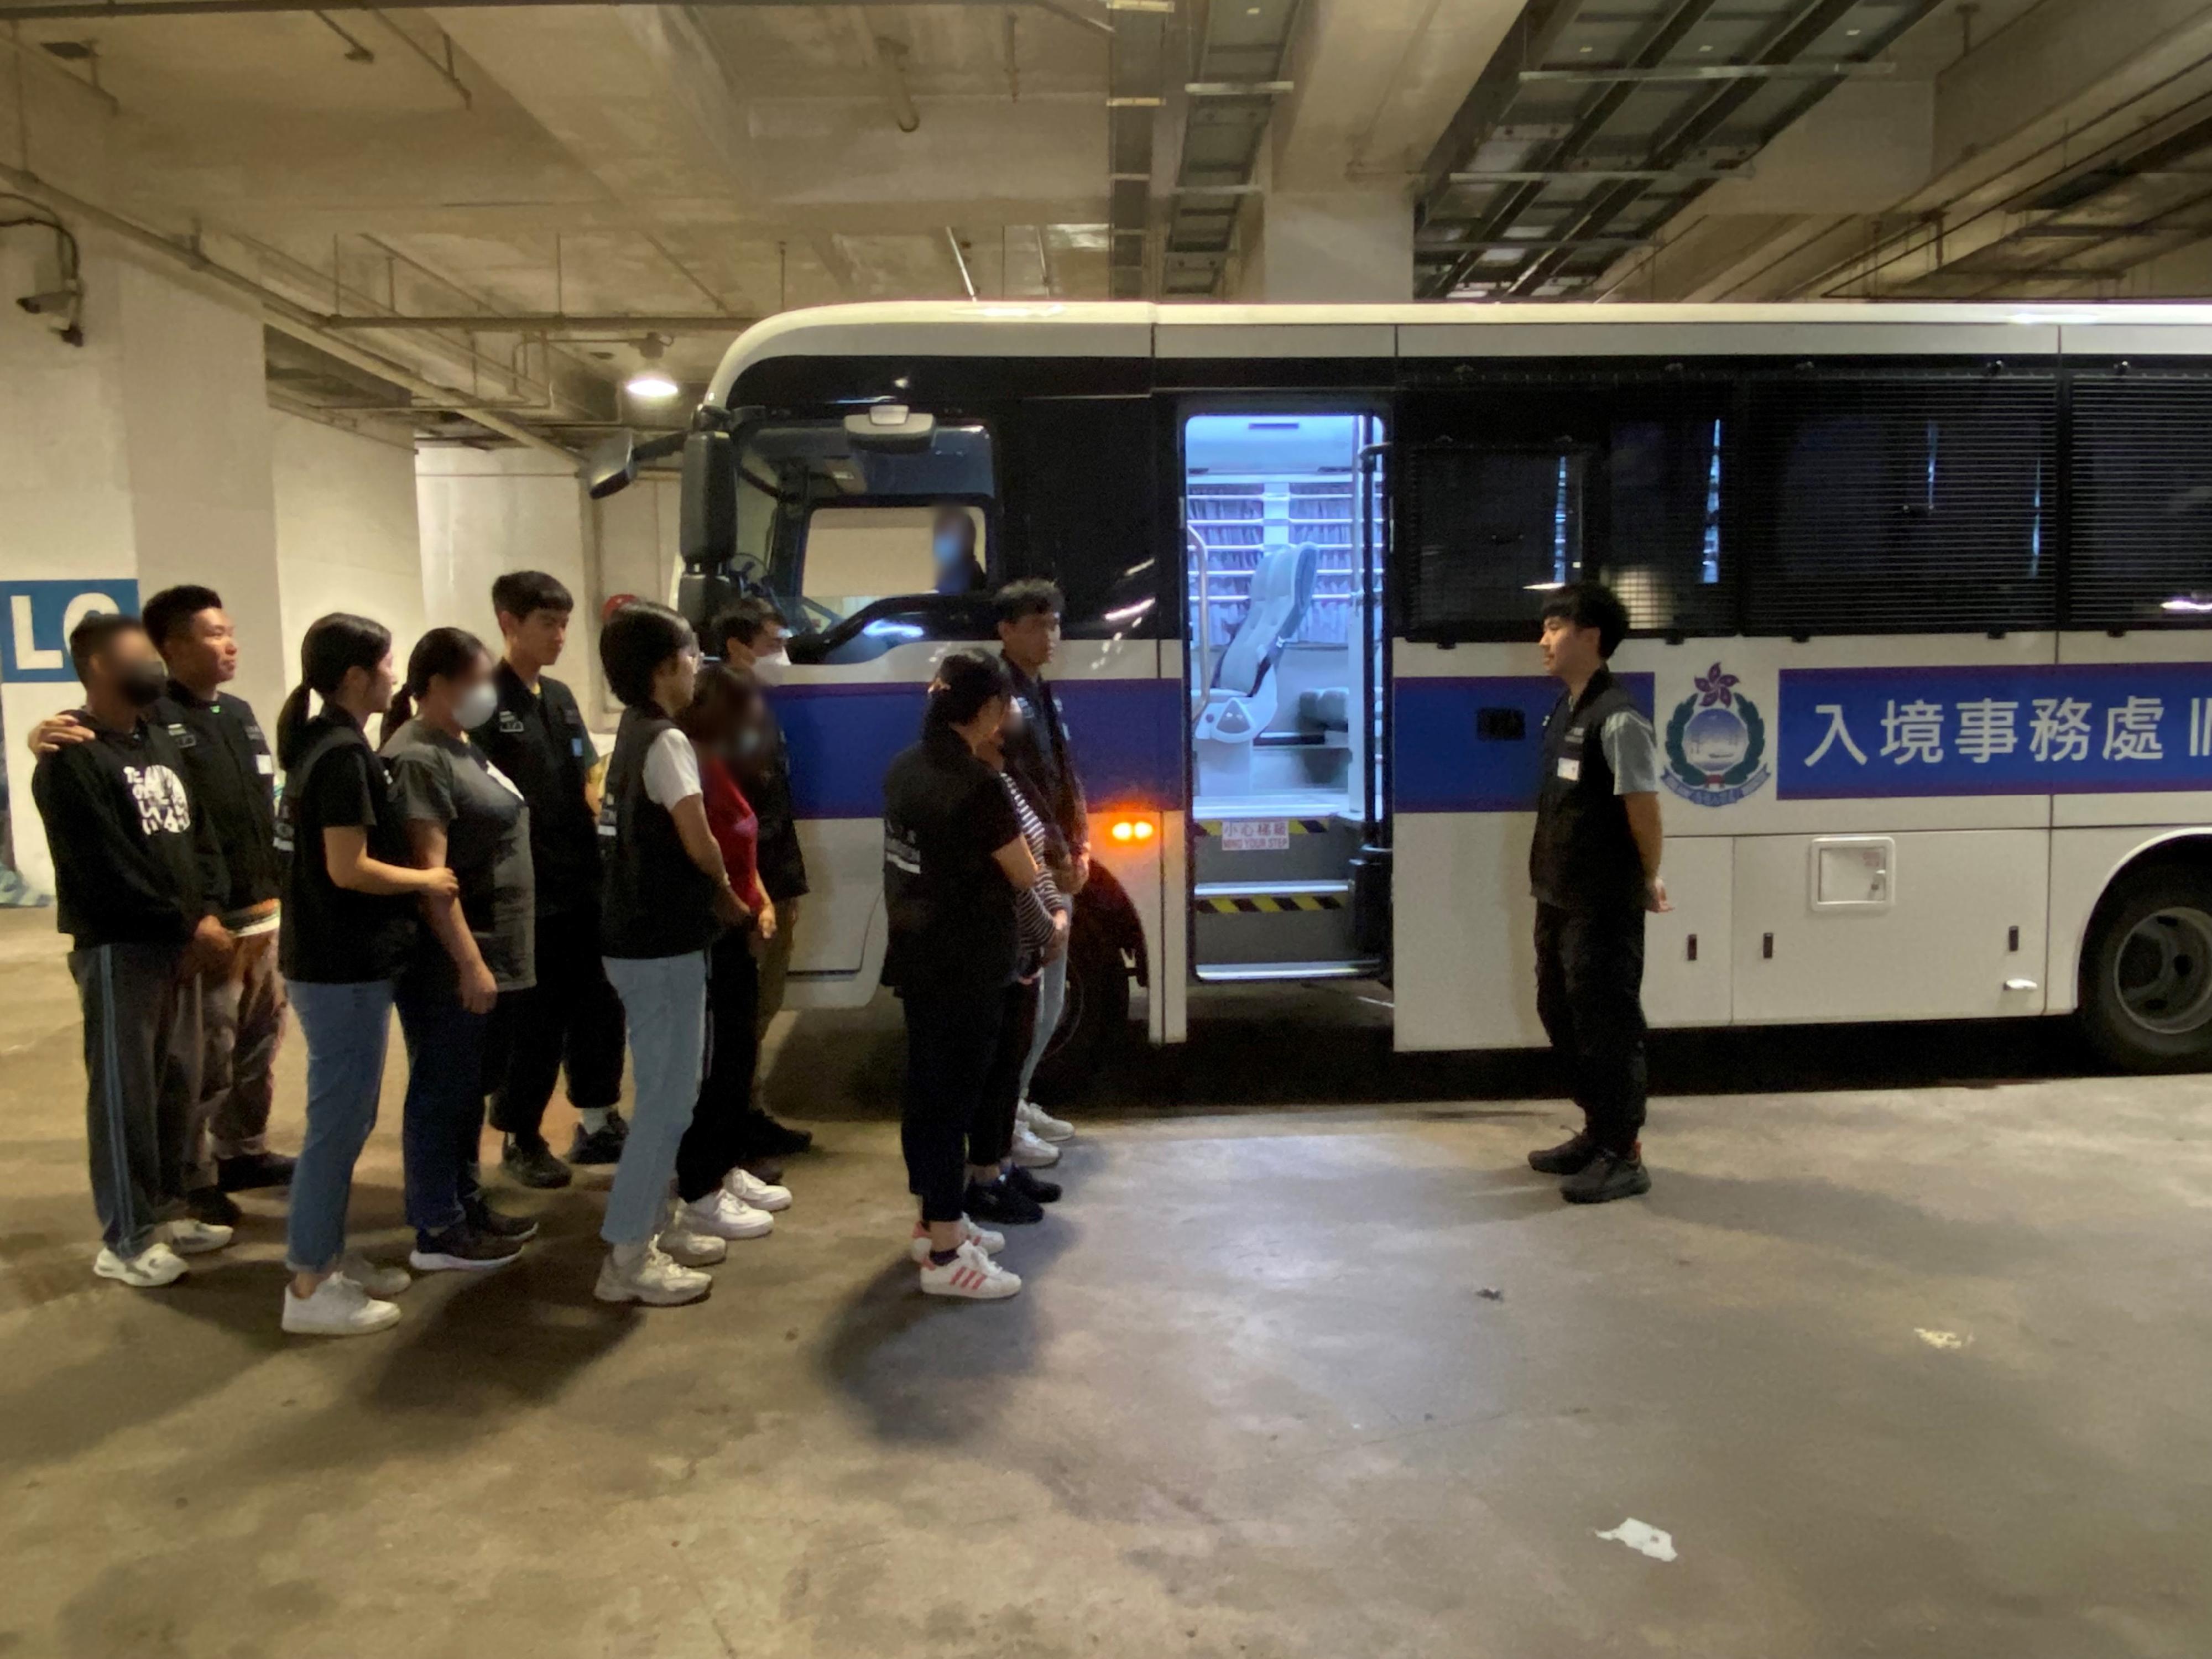 The Immigration Department mounted a series of territory-wide anti-illegal worker operations codenamed "Twilight" and joint operations with the Hong Kong Police Force codenamed "Champion" and "Windsand" for four consecutive days from May 8 to yesterday (May 11). Photo shows suspected illegal workers arrested during an operation.